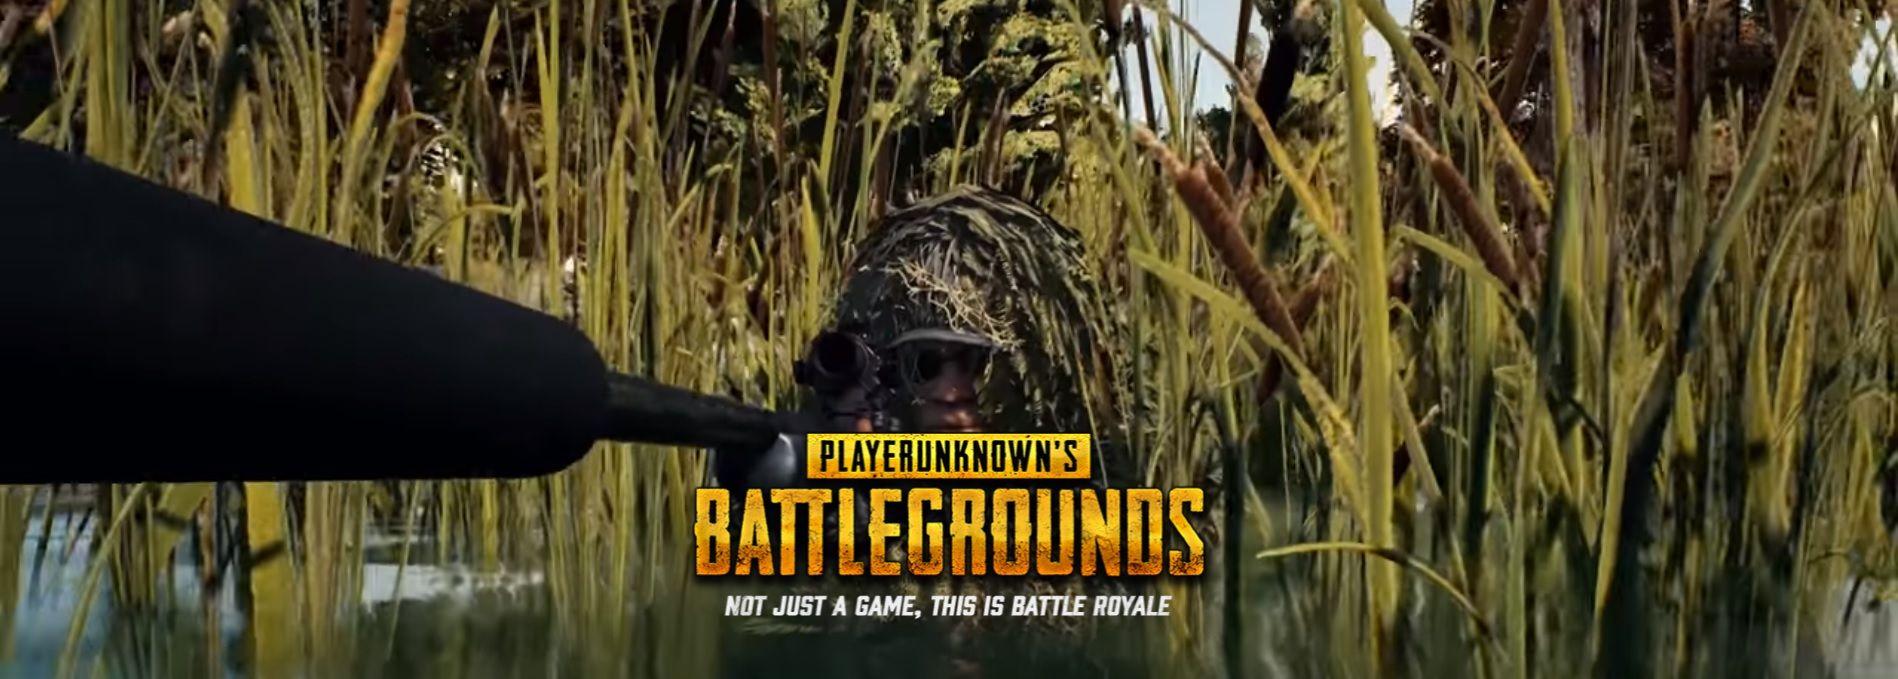 PLAYERUNKNOWN's BATTLEGROUNDS Review: Old Idea, Fresh Take